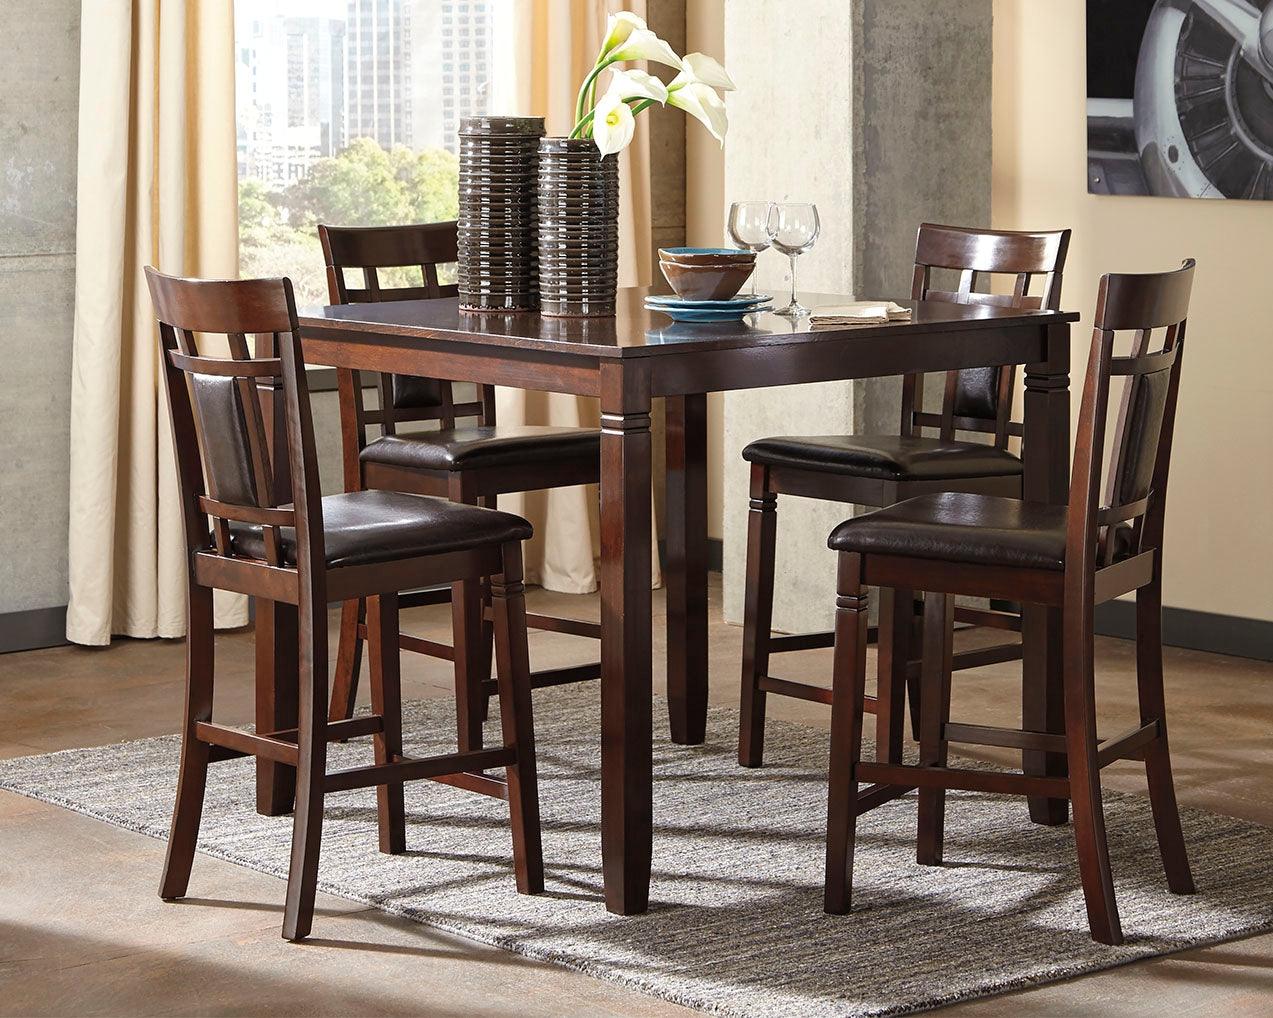 Bennox Brown Counter Height Dining Table And Bar Stools (Set Of 5) - Ella Furniture